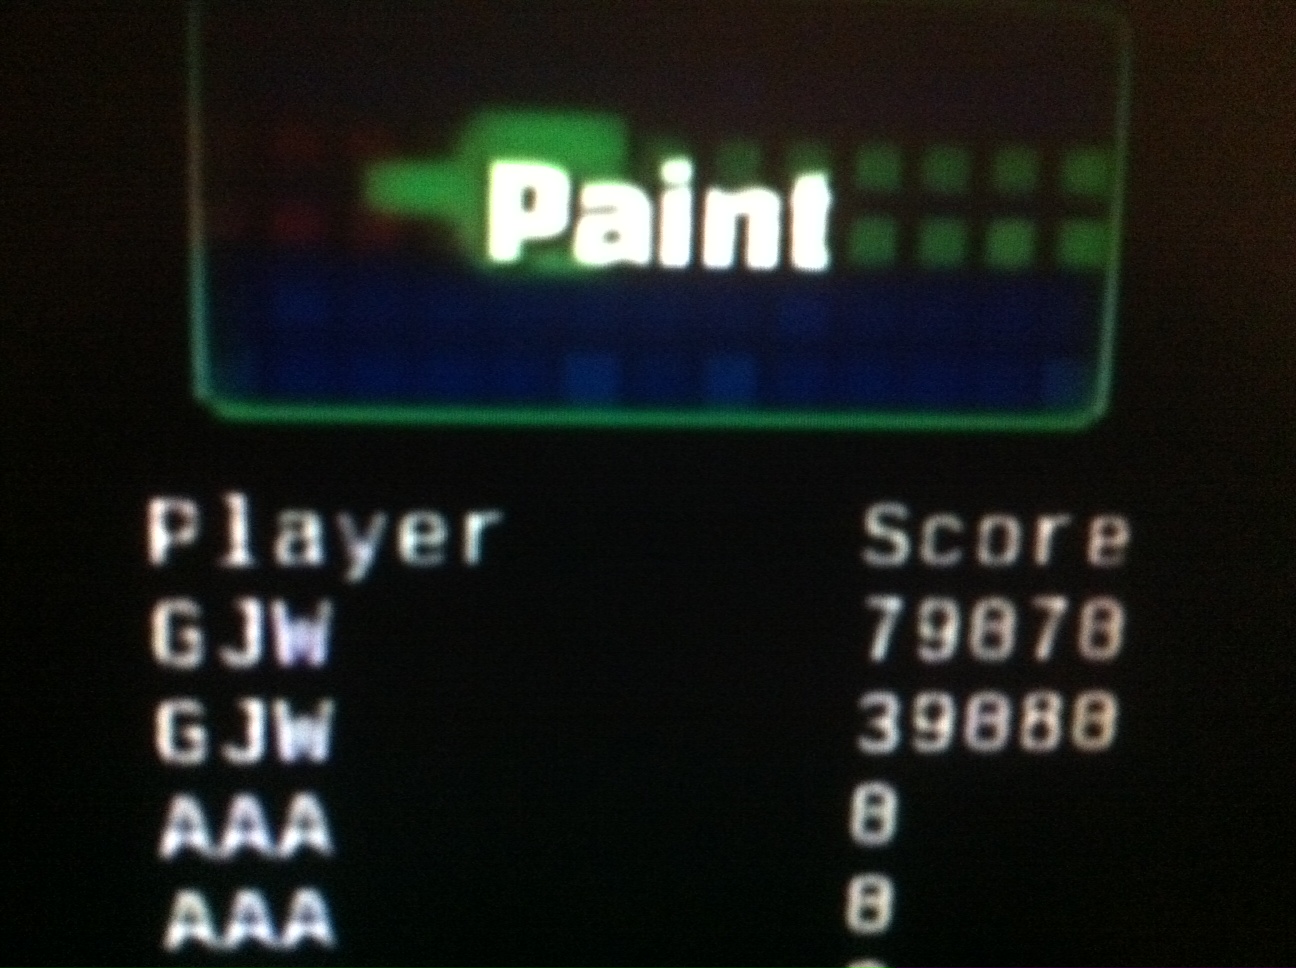 Frogger Hyper Arcade Edition: Paint 79,070 points